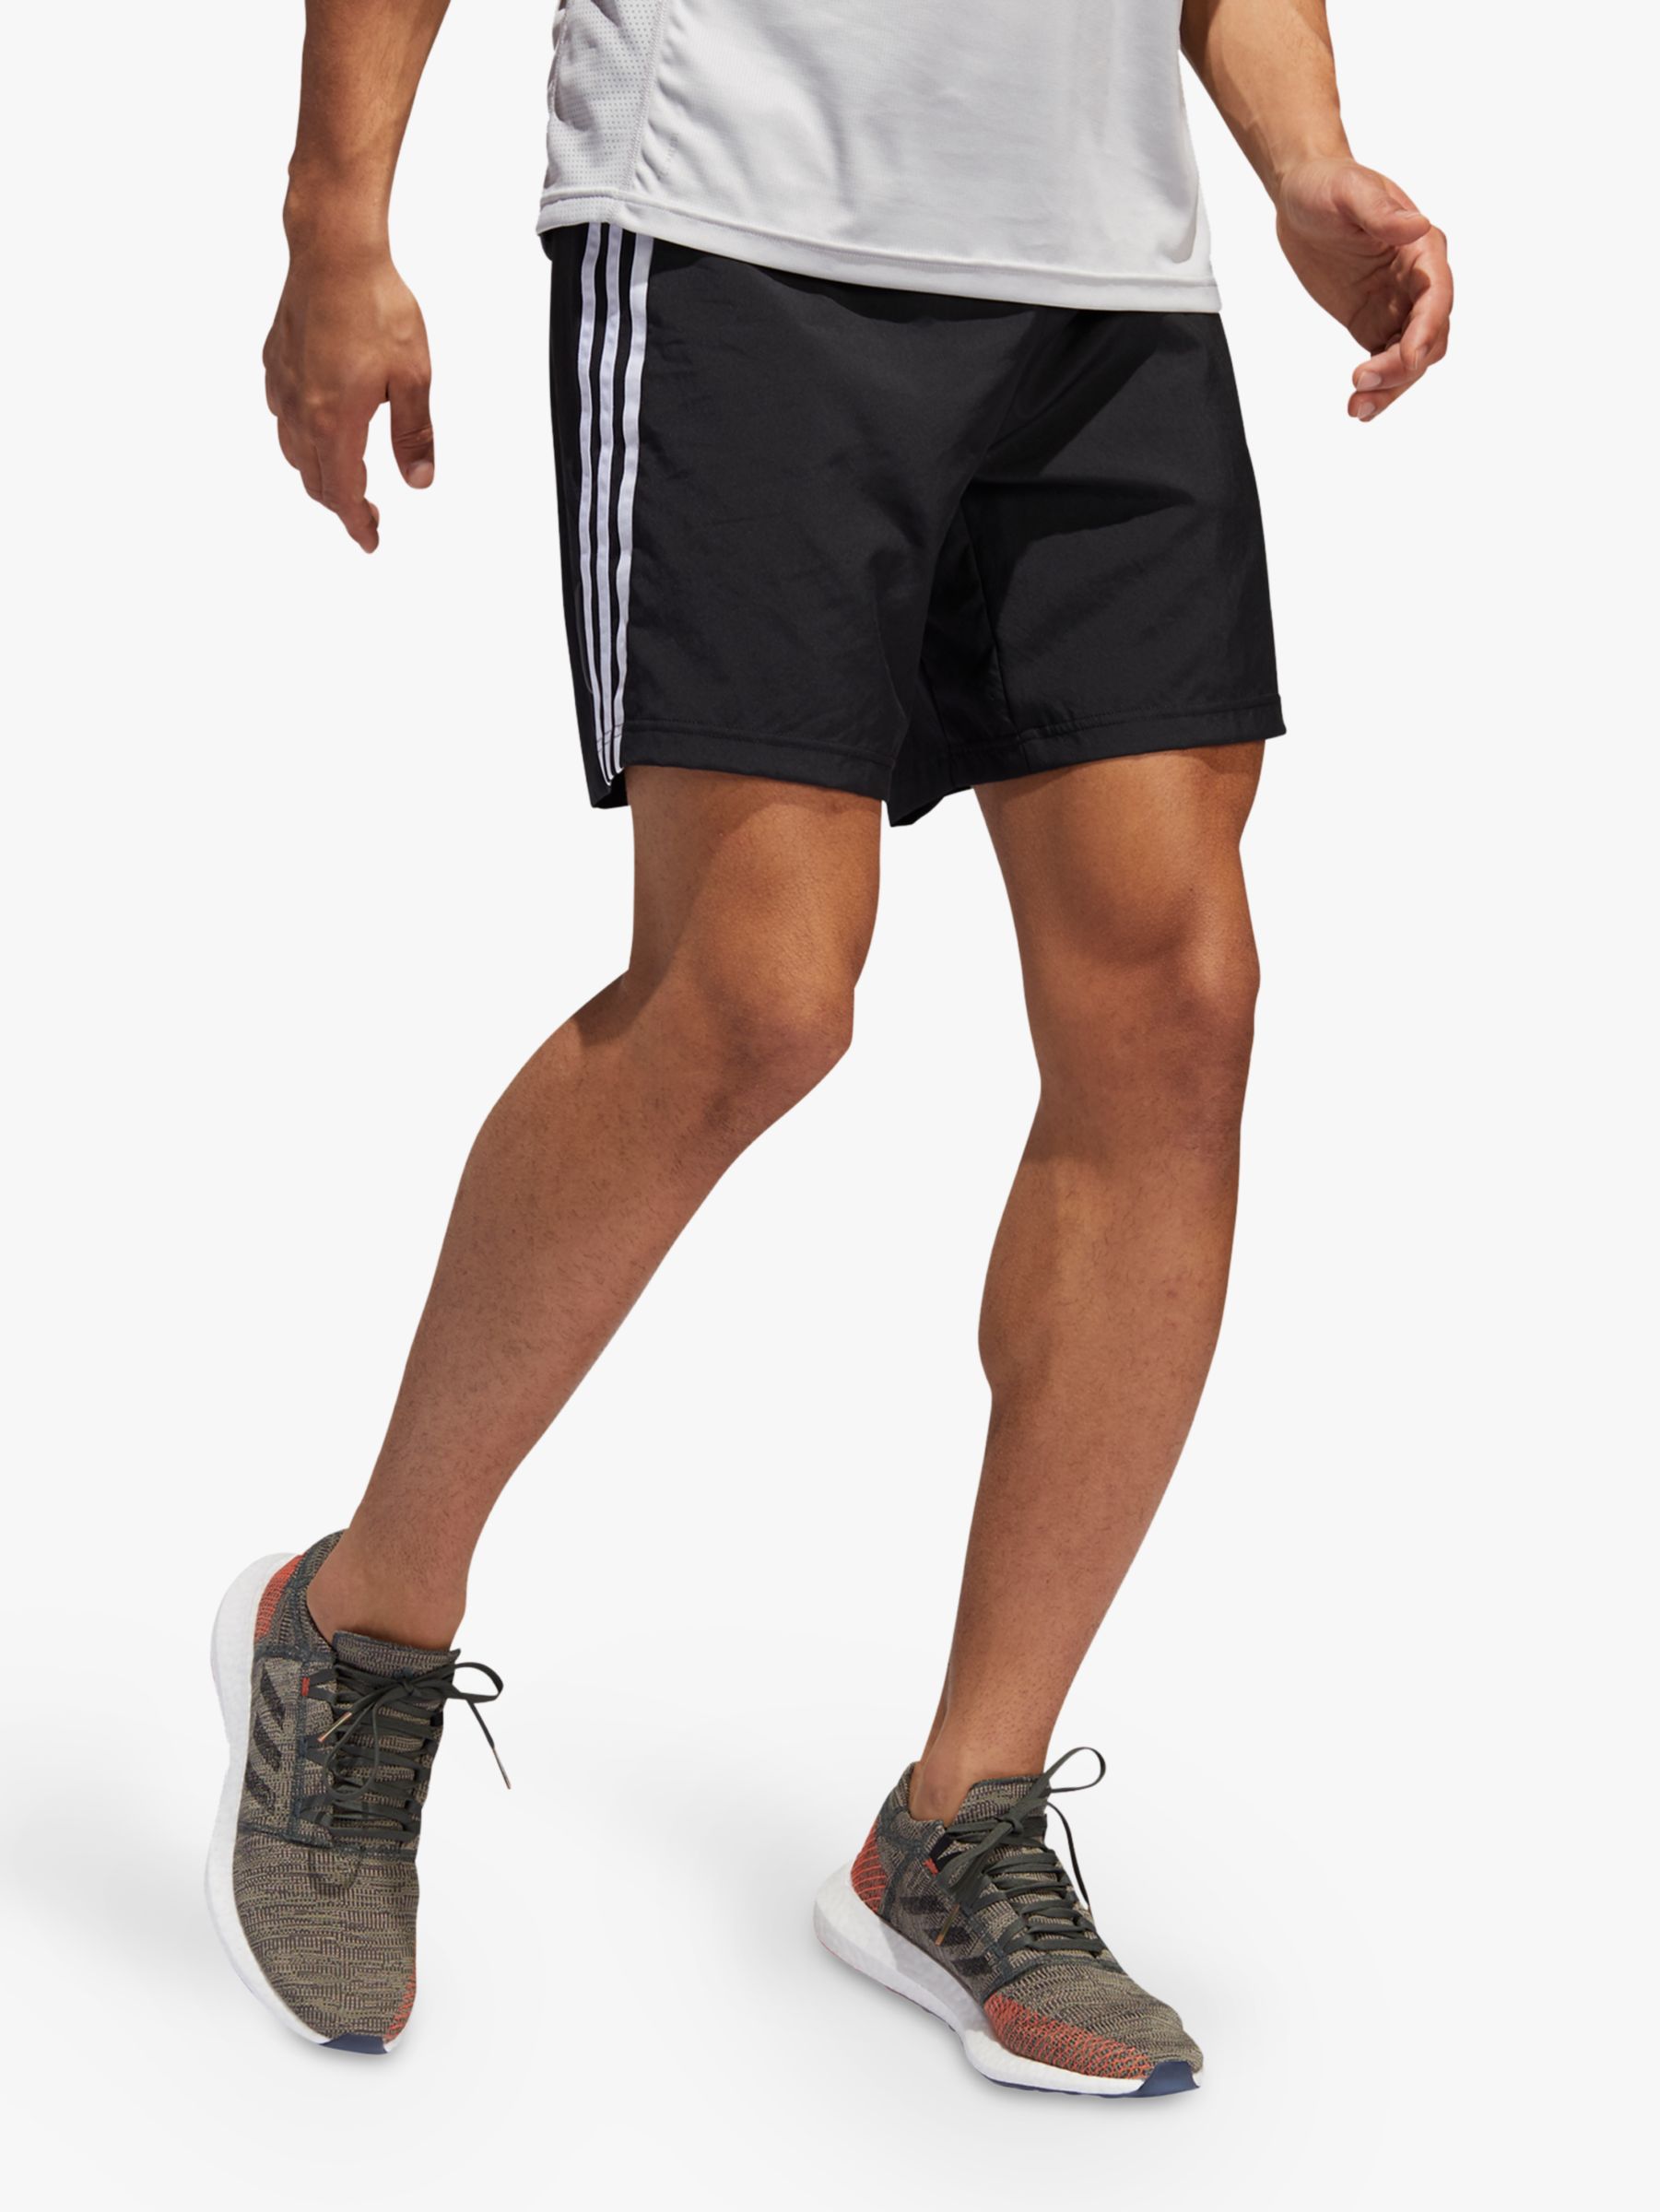 adidas shorts with stripes